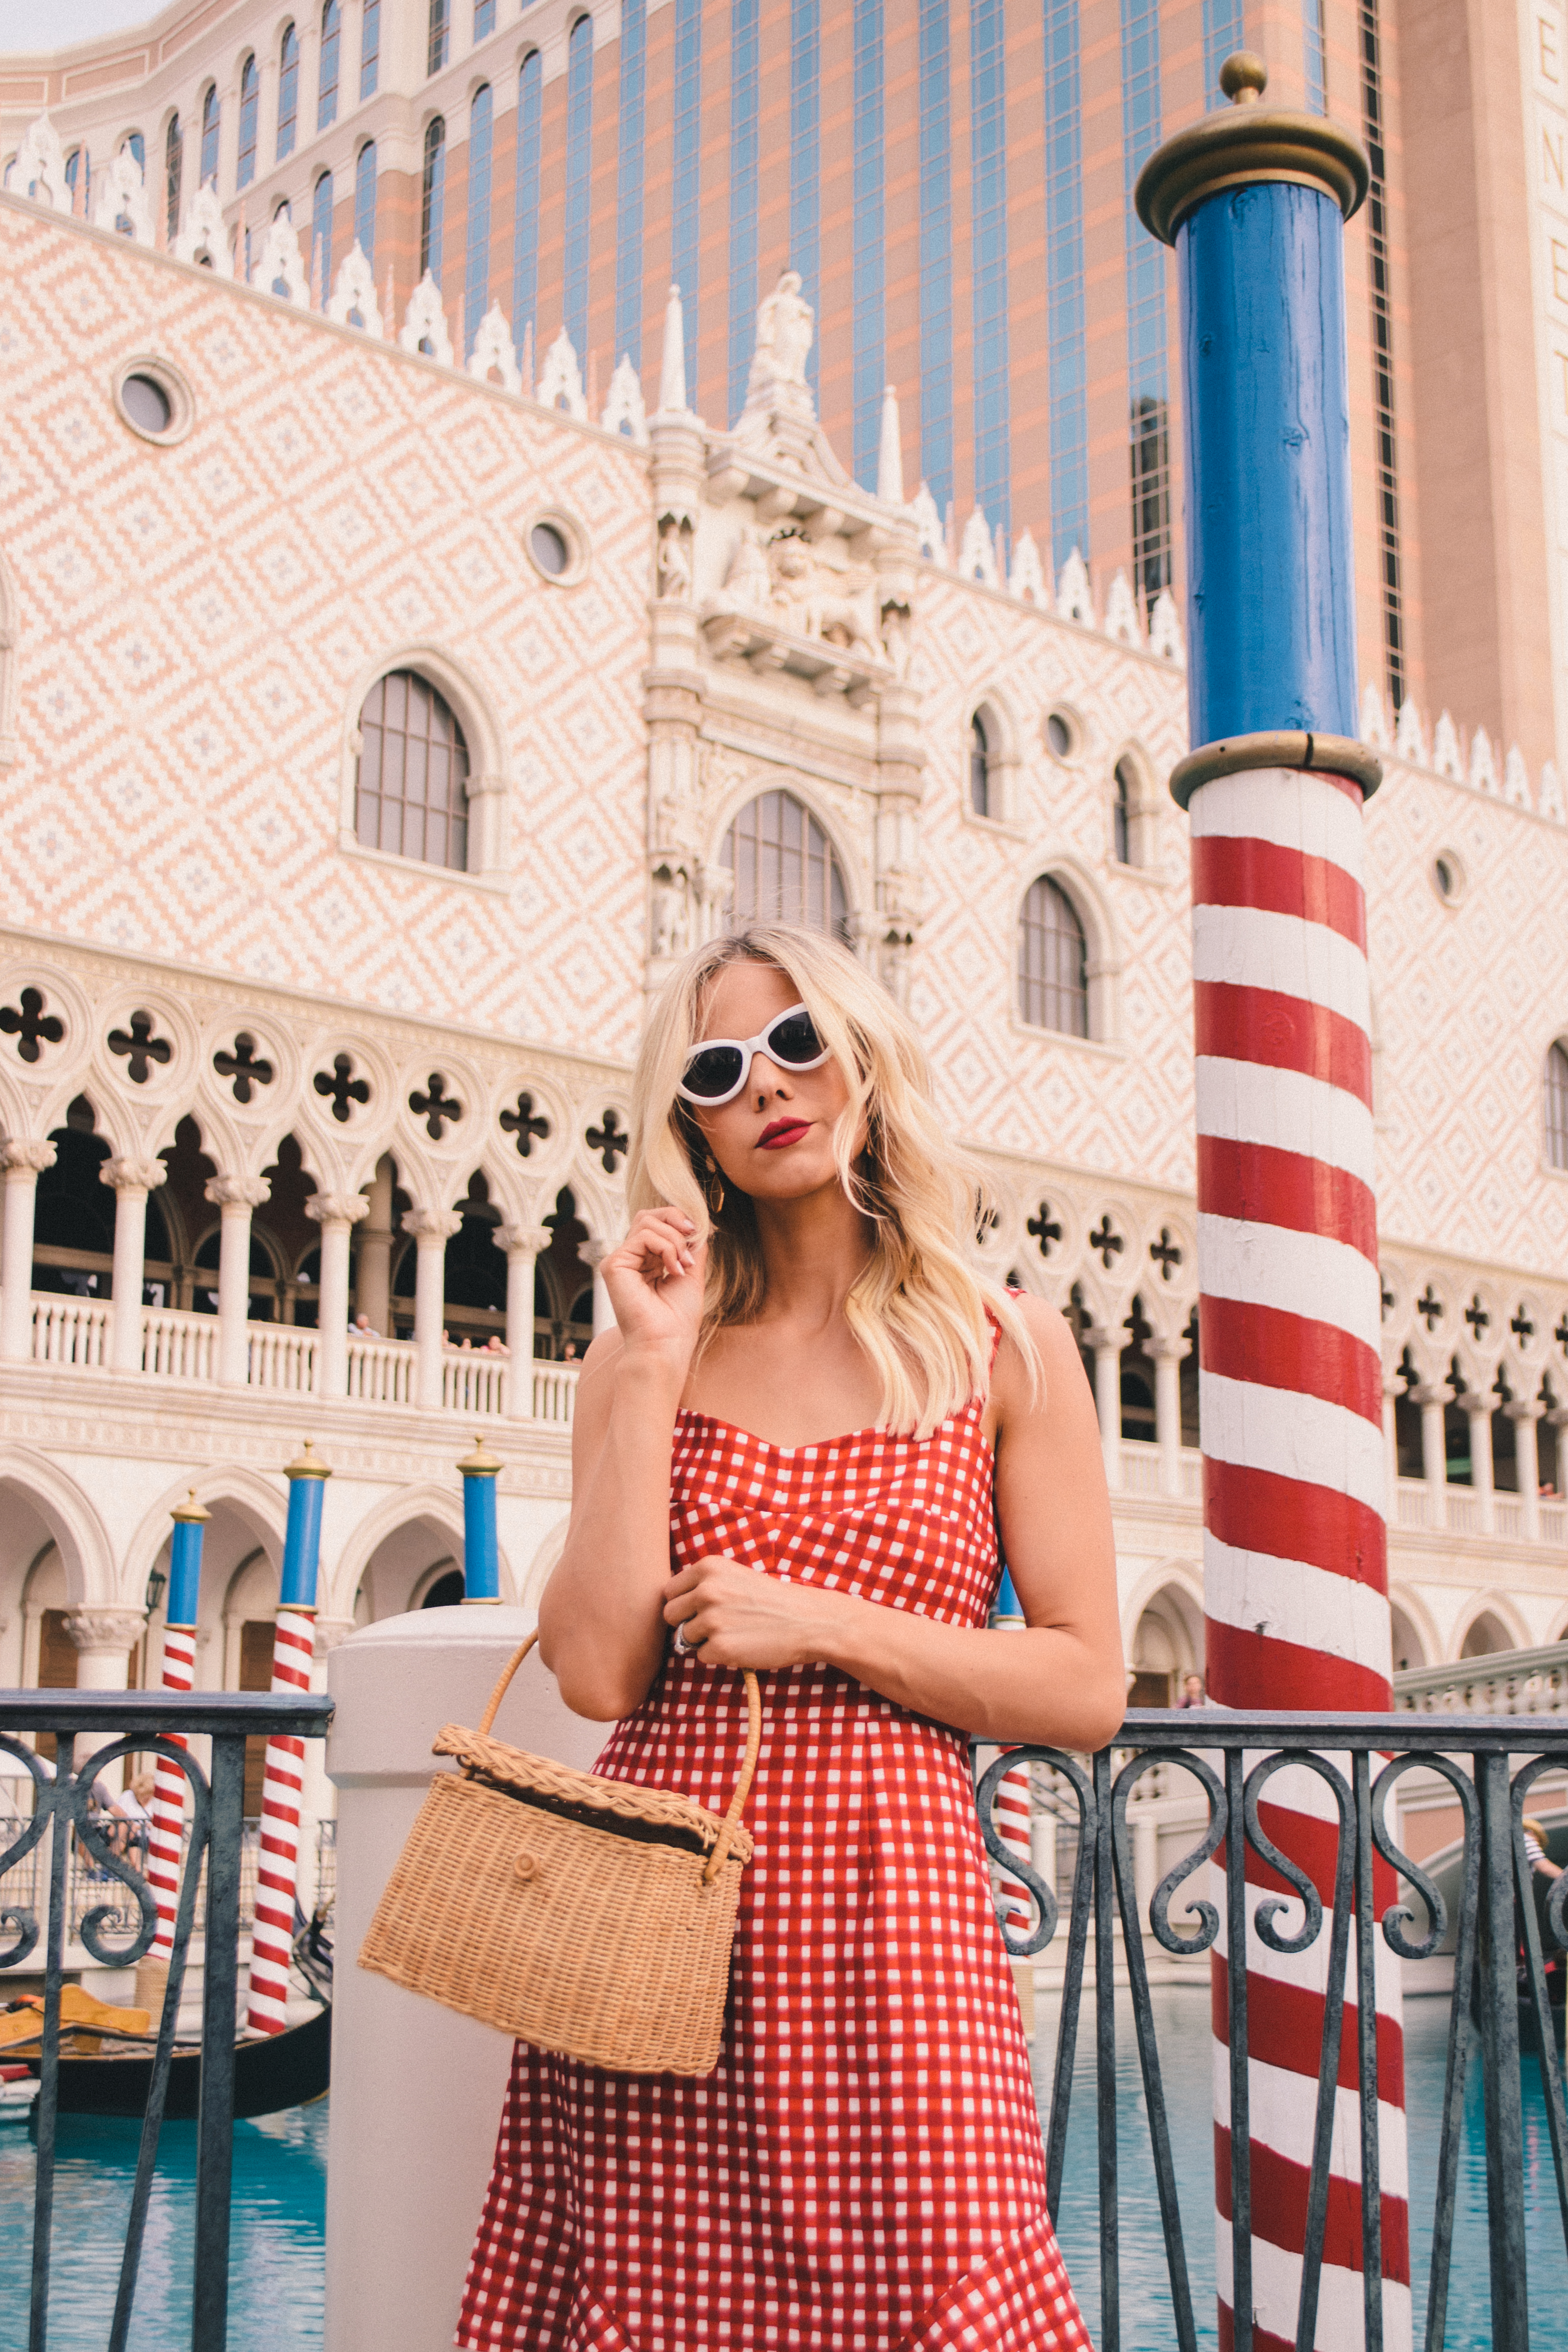 red gingham dress, summer style 2019, summer outfit, summer style, summer fashion, Las Vegas, Las Vegas Instagram, Las Vegas photography, the Venetian Las Vegas, 50s gingham, 1950s gingham, picnic outfit, picnic chic #gingham #summerfashion #lasvegas